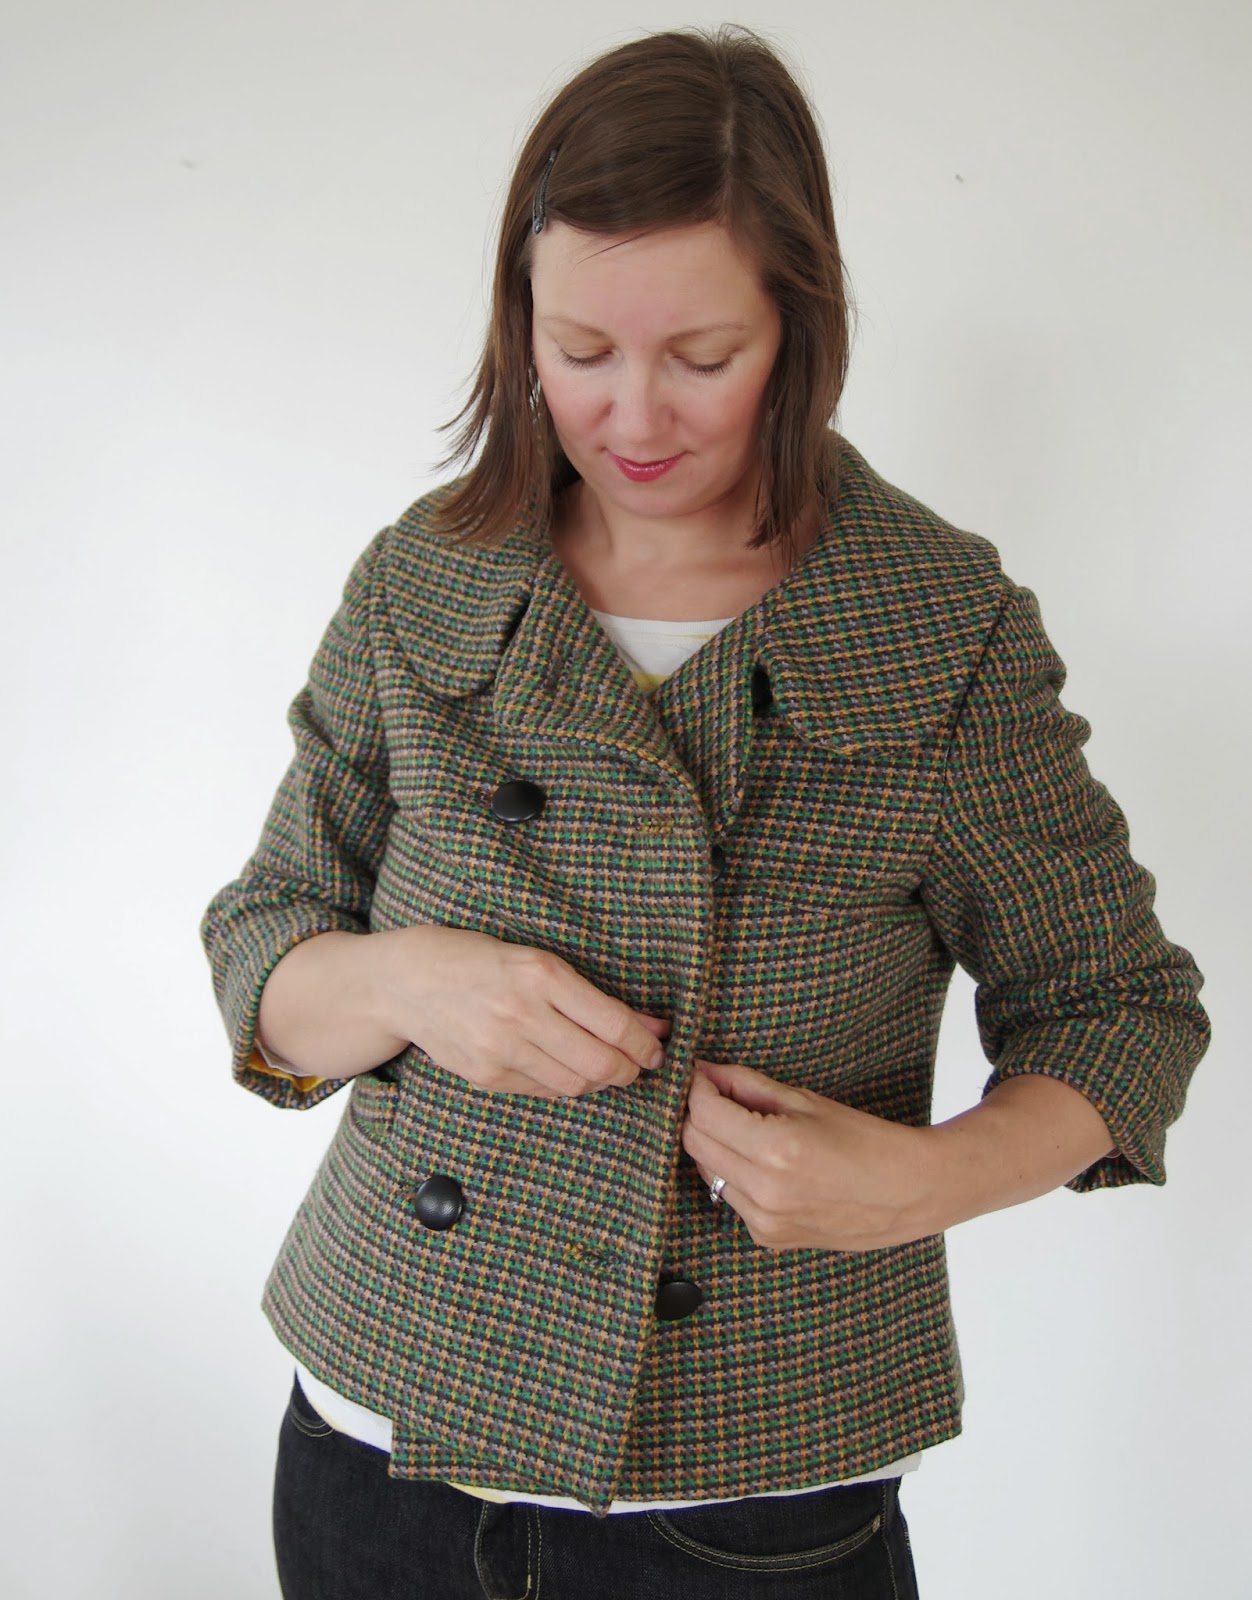 Sew sew sew your boat: Completed: Anise Jacket from Colette Patterns